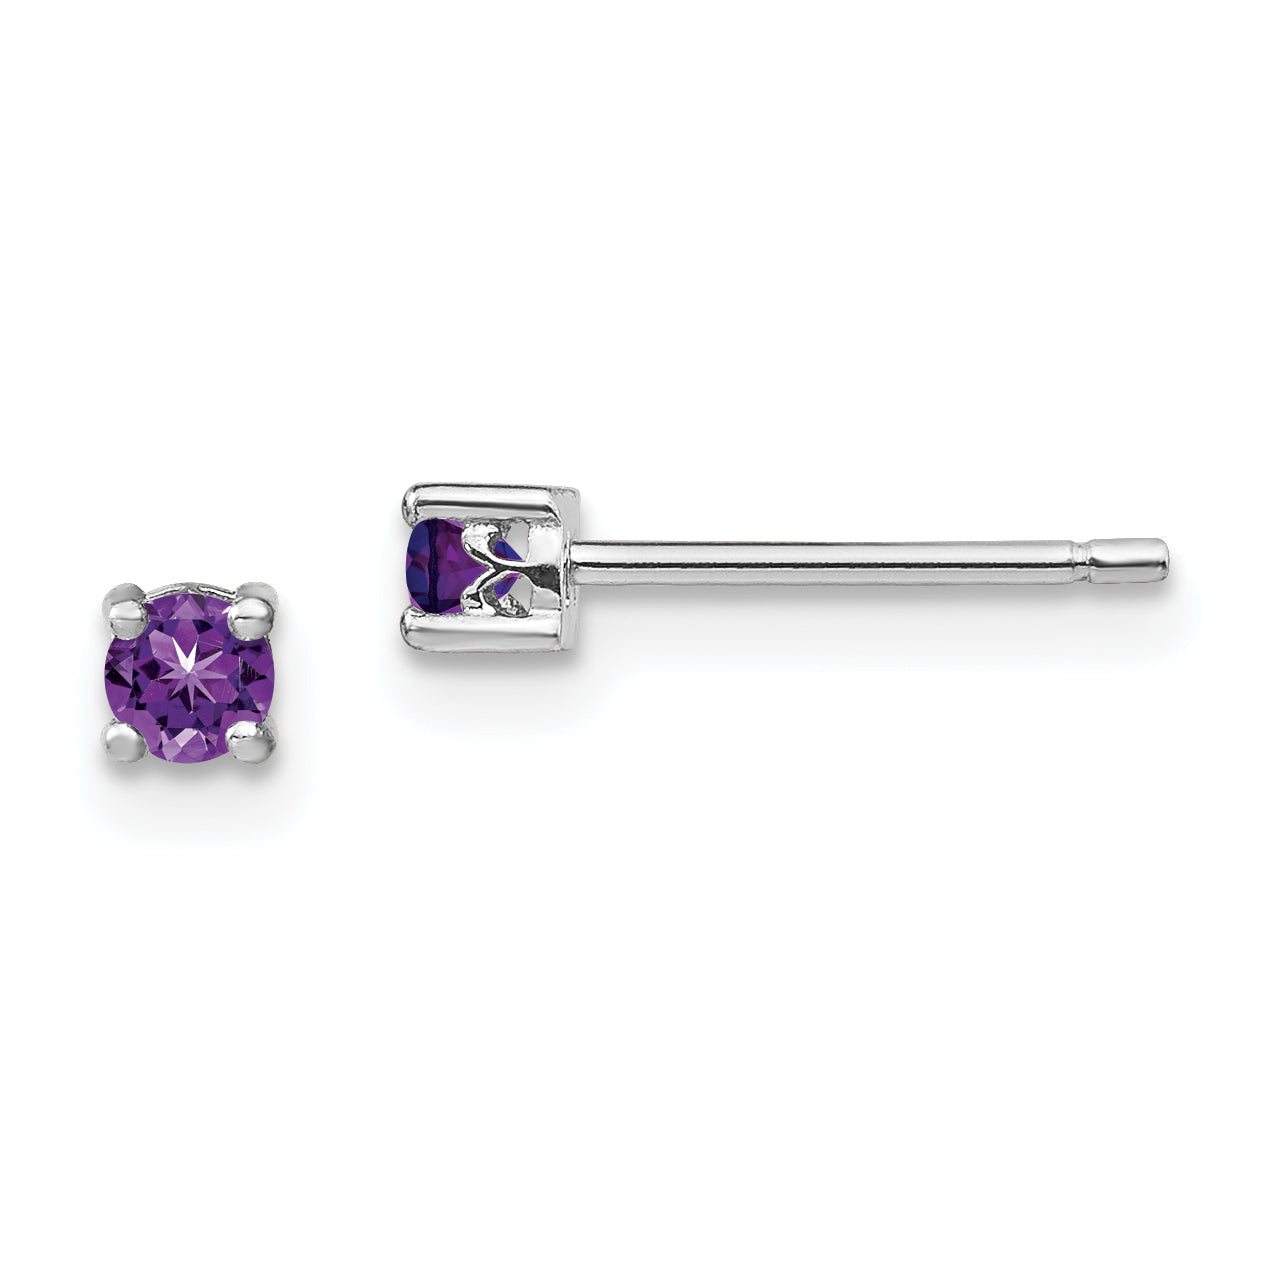 Sterling Silver Rhodium-plated 3mm Round Amethyst Post Earrings